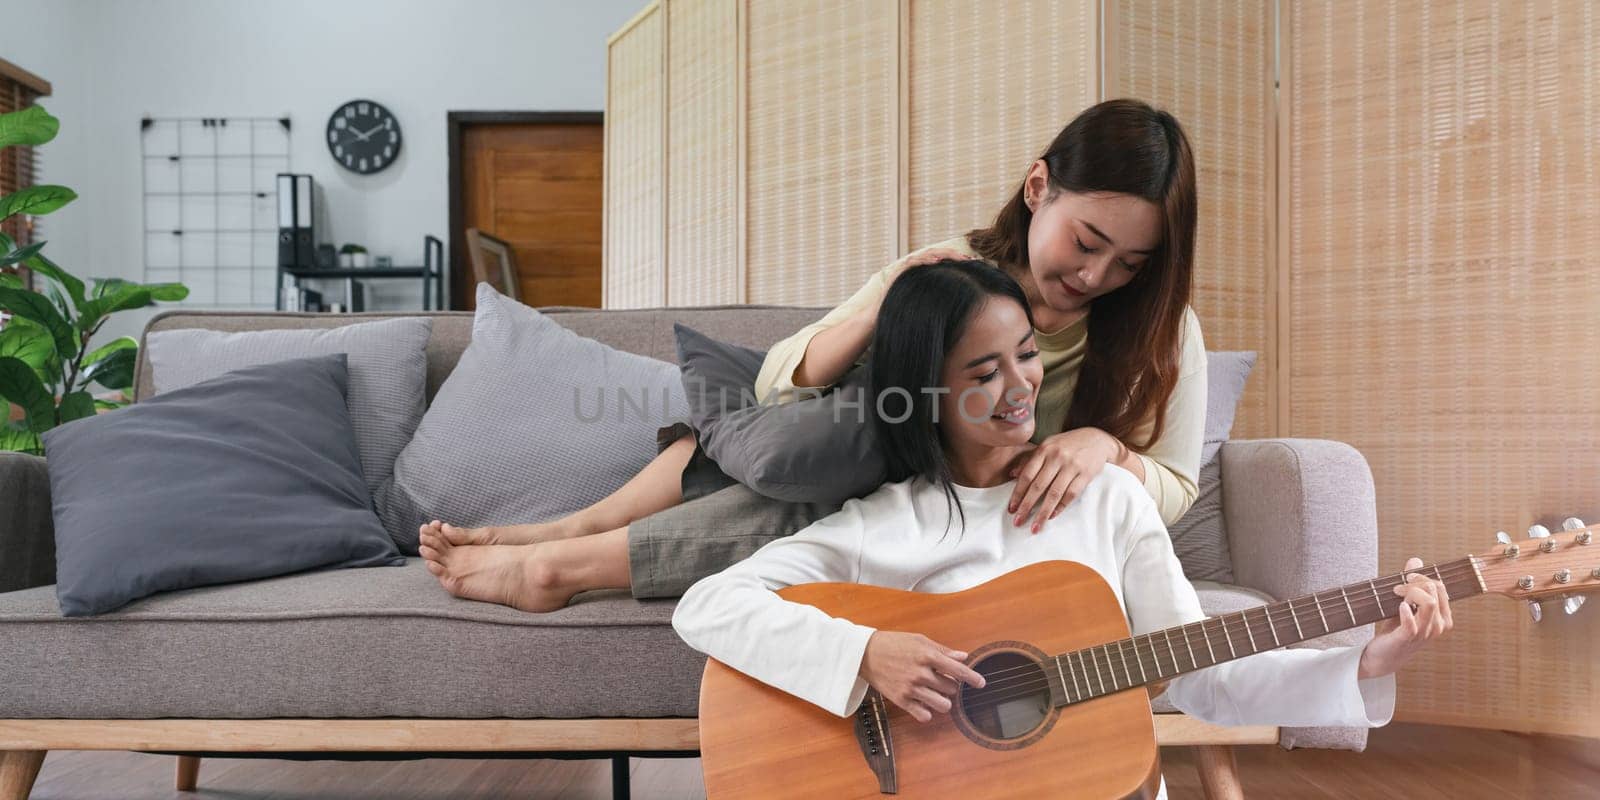 Homosexual LGBT. lesbian couple together concept. Couple of young women playing guitar and singing in living room with happiness moment.